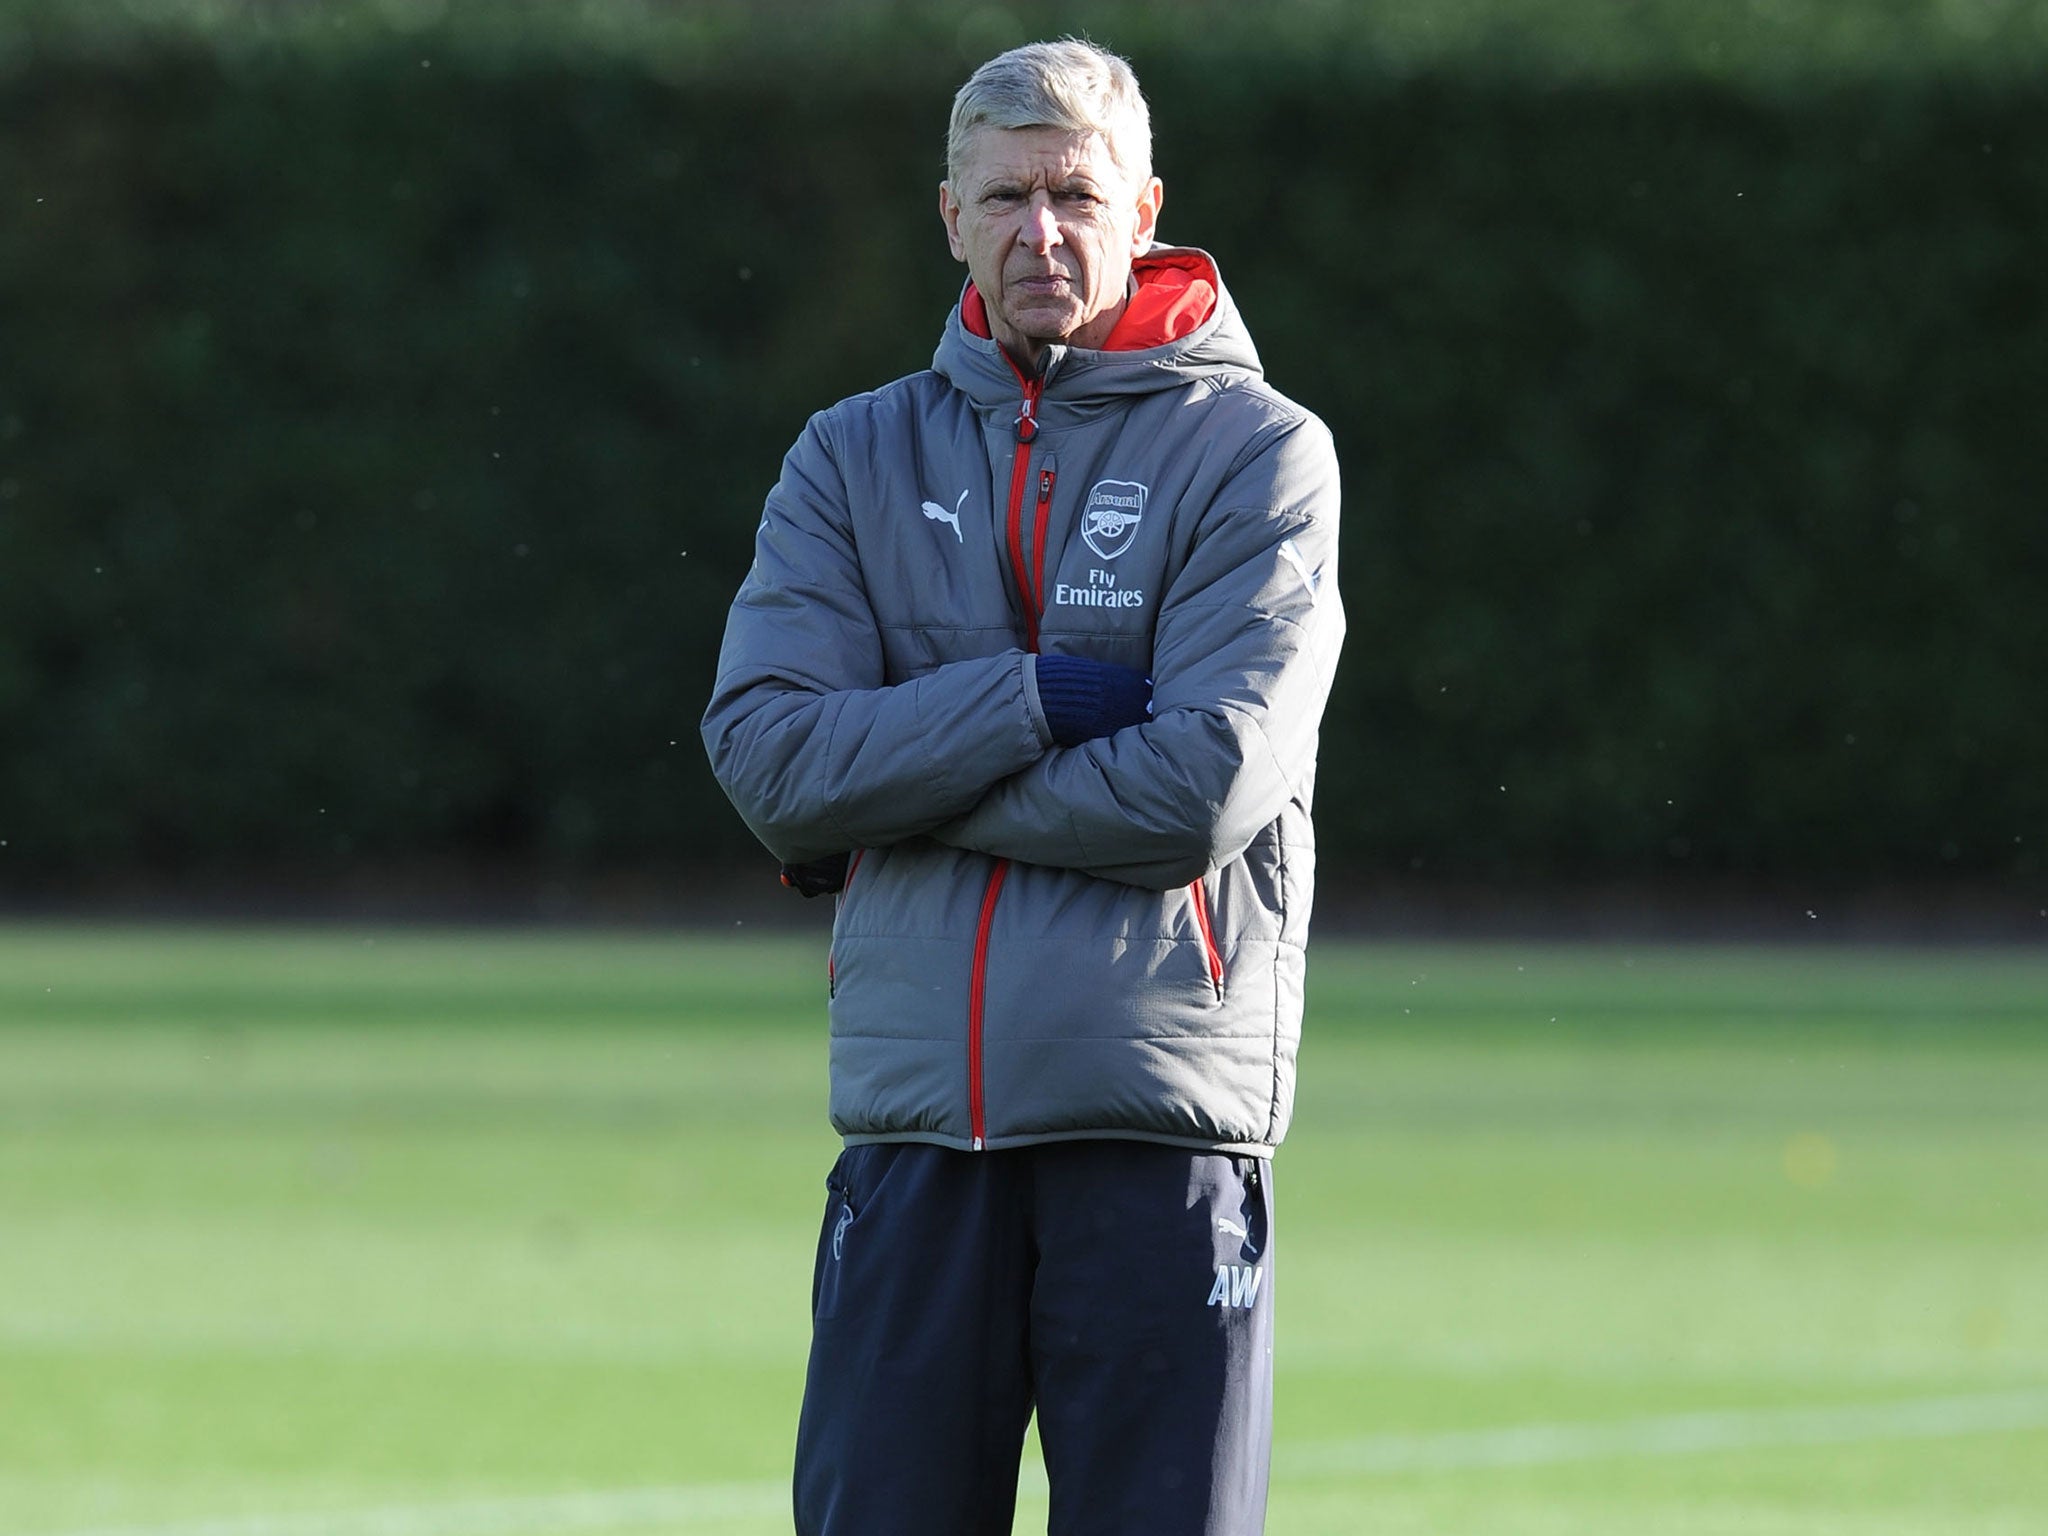 Arsene Wenger says teams in the Premier League now have a duty to entertain due to the money being invested